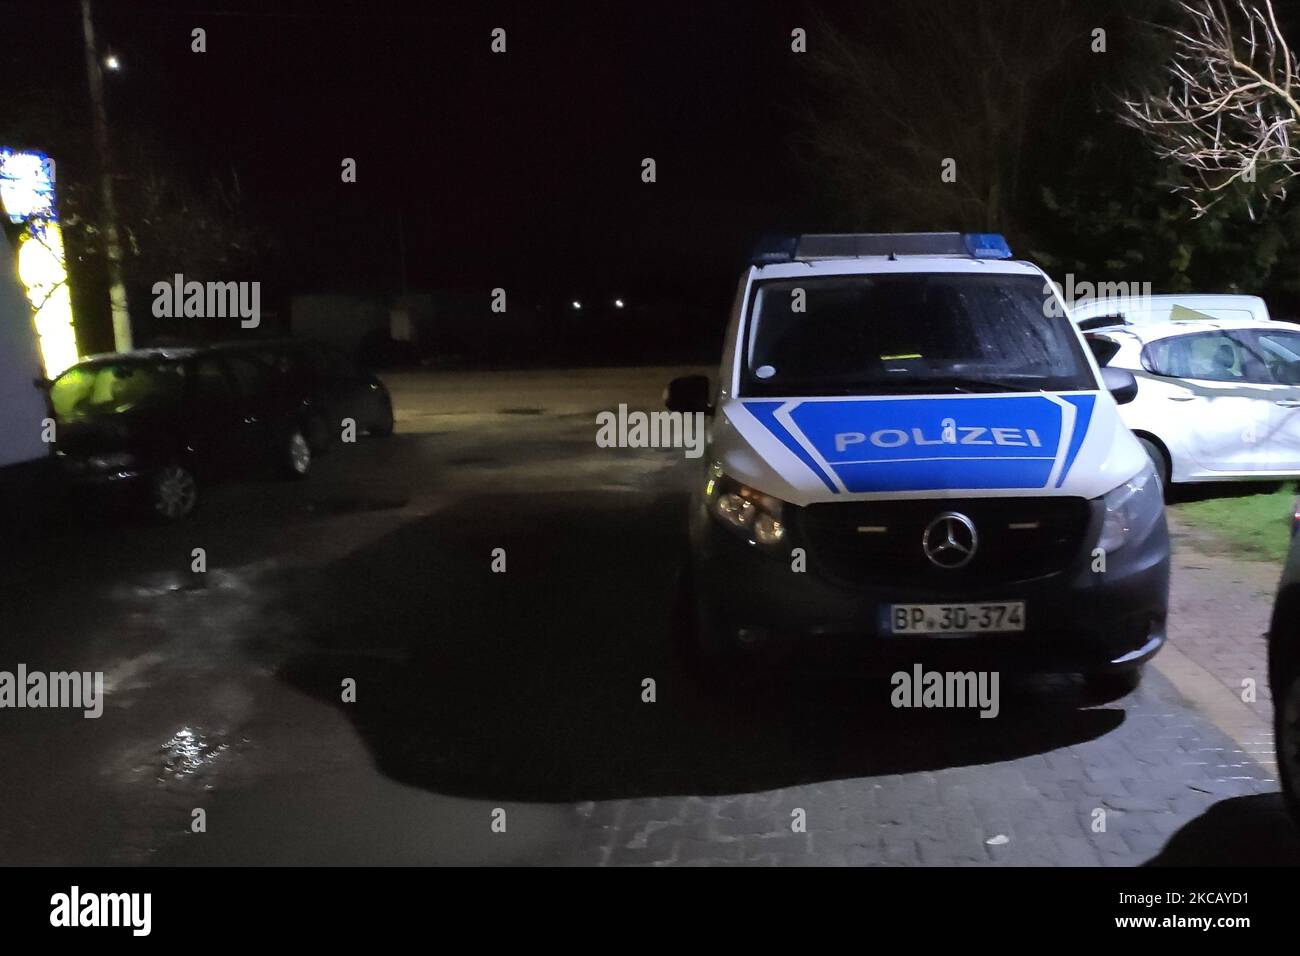 A van from the German police part of the FRONTEX force as seen near the Greek-Turkish borders. The vehicle has the logo of the Federal Police Bundespolizei or BPOL and the inscription POLIZEI. Frontex the European Border and Coast Guard Agency is controlling the external European Schengen borders assisting national law enforcement to the member state countries. Operation Poseidon - Poseidon Rapid Intervention oversees the southeastern land border of the EU with Turkey on Evros river (Maritsa or Meriç). The operation was reinforced in March 2020, during the border crisis when Turkey allowed tho Stock Photo